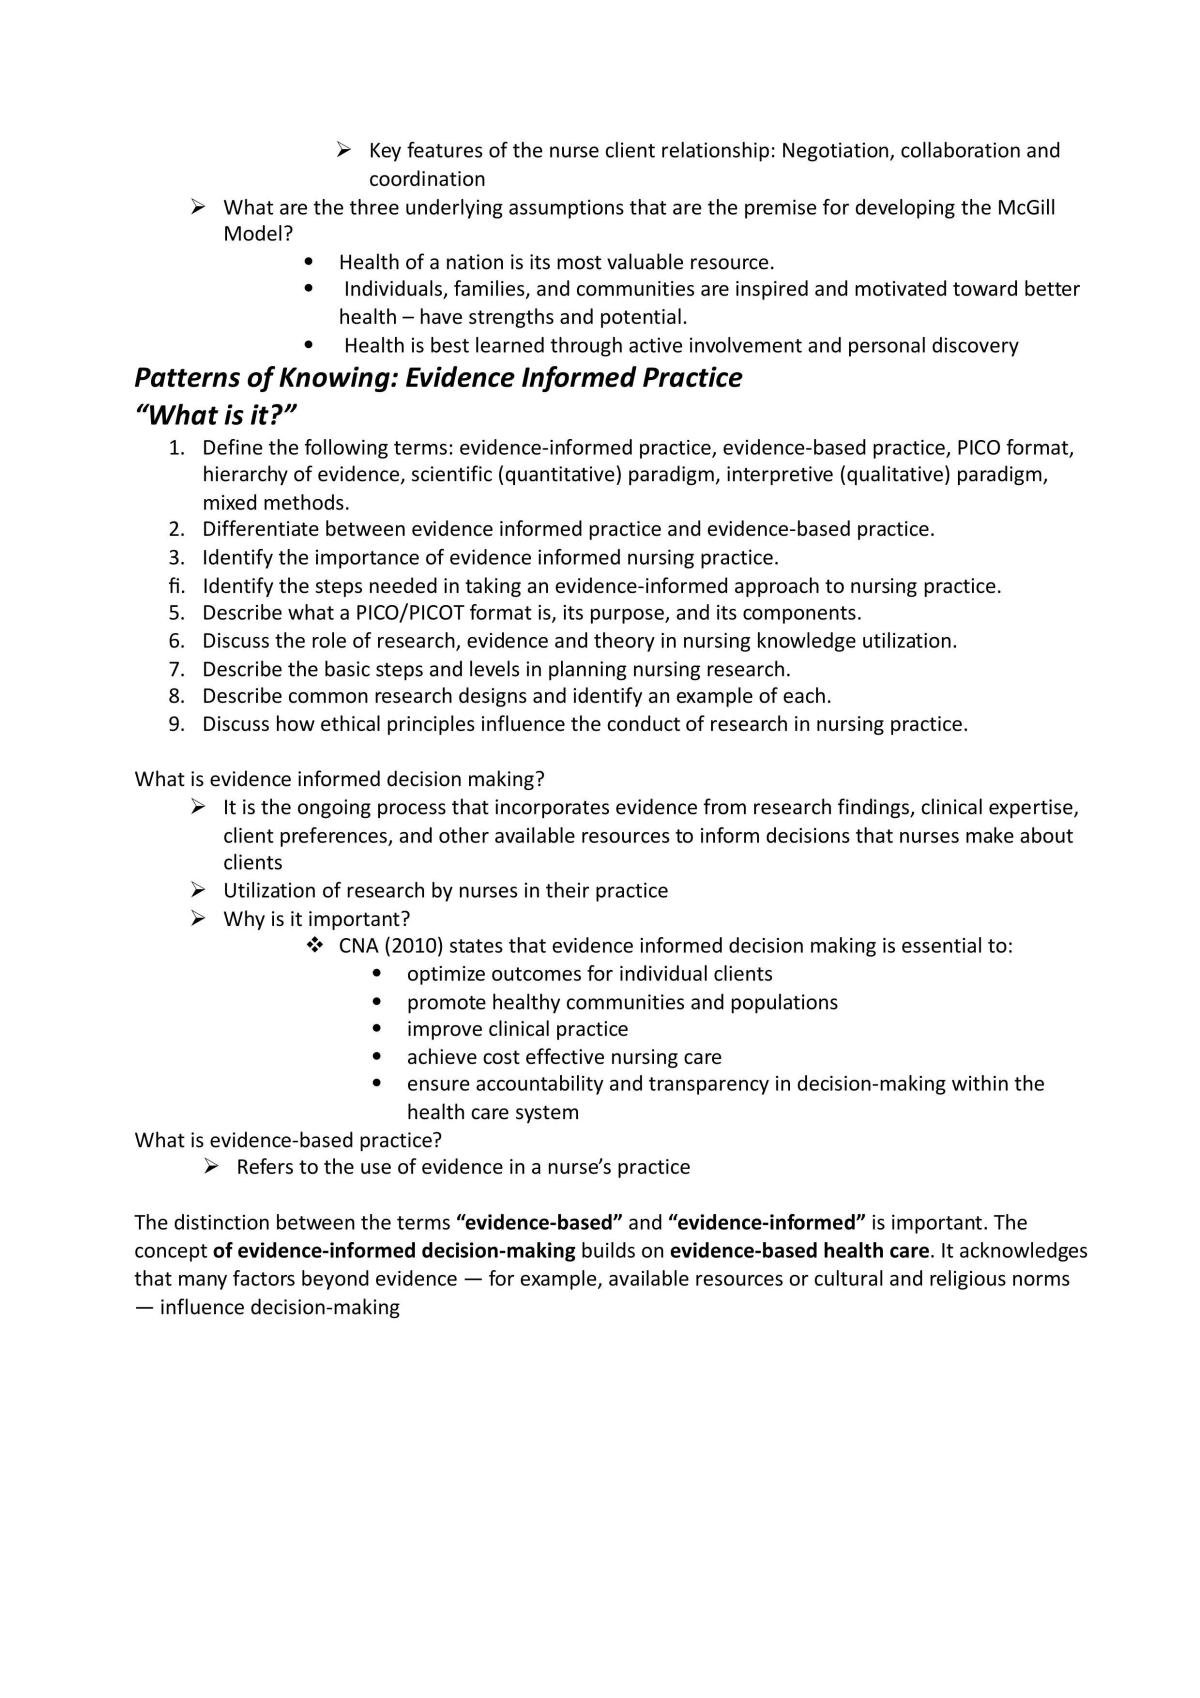 The Discipline of Nursing Course Notes - Page 13